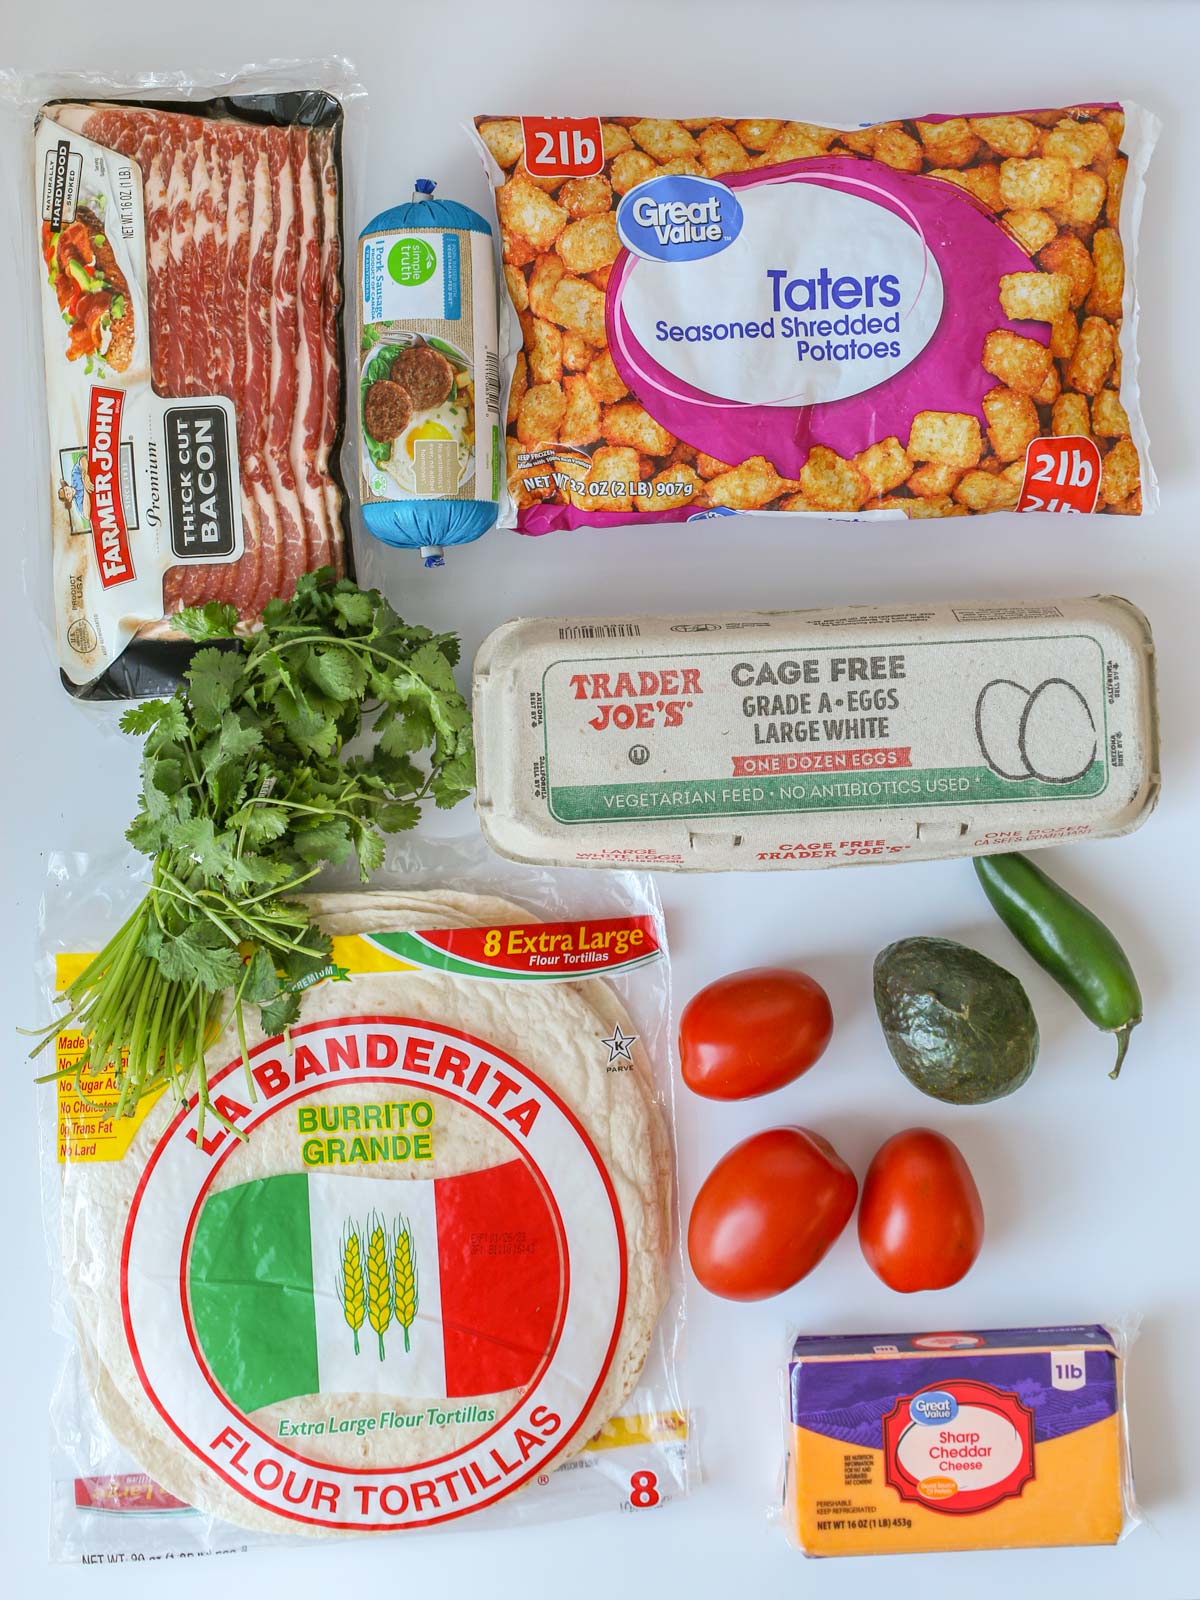 array of ingredients to make breakfast burritos laid out on white table.